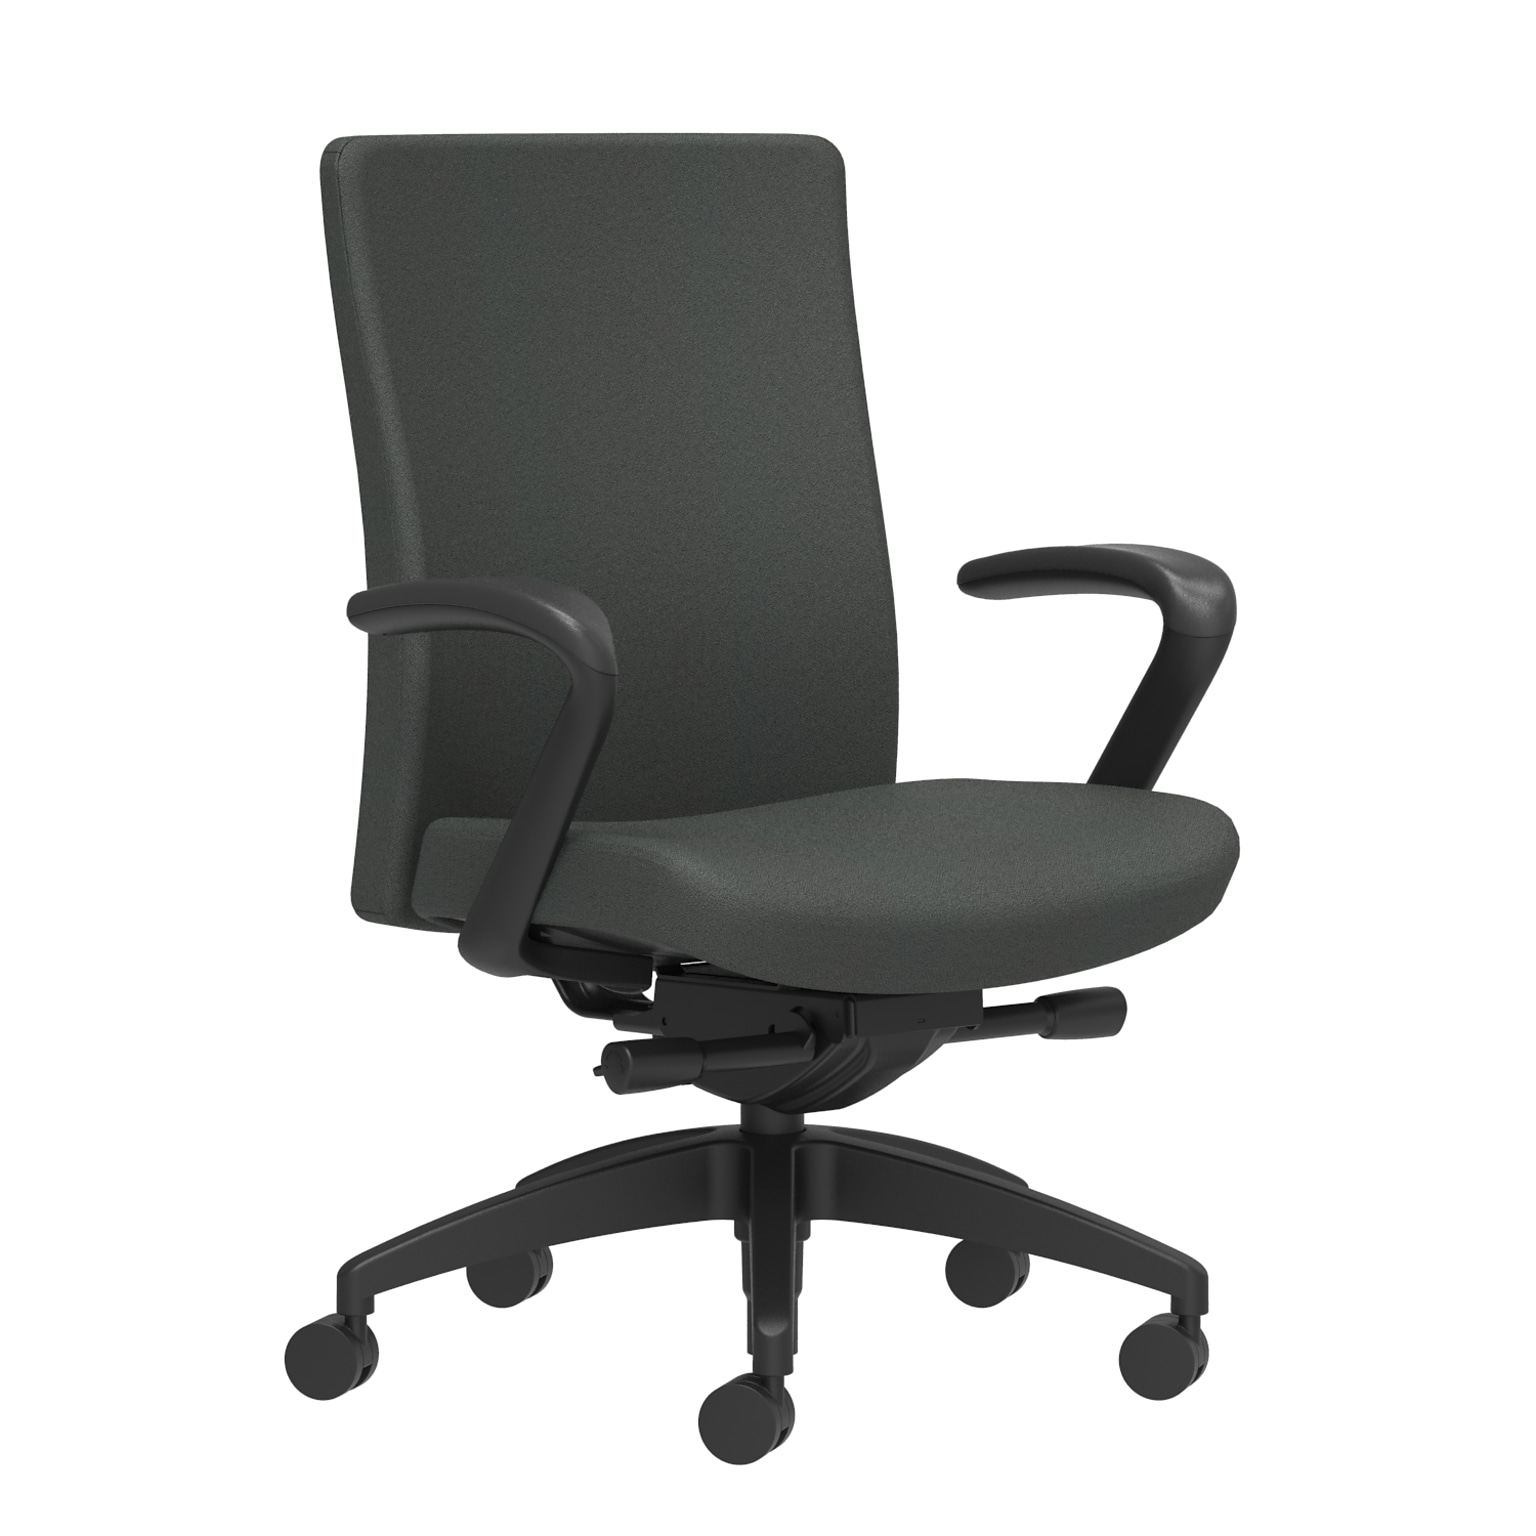 Union & Scale Workplace2.0™ Task Chair Upholstered, Fixed Arms, Iron Ore Fabric, Synchro Tilt Seat Slide (54188)